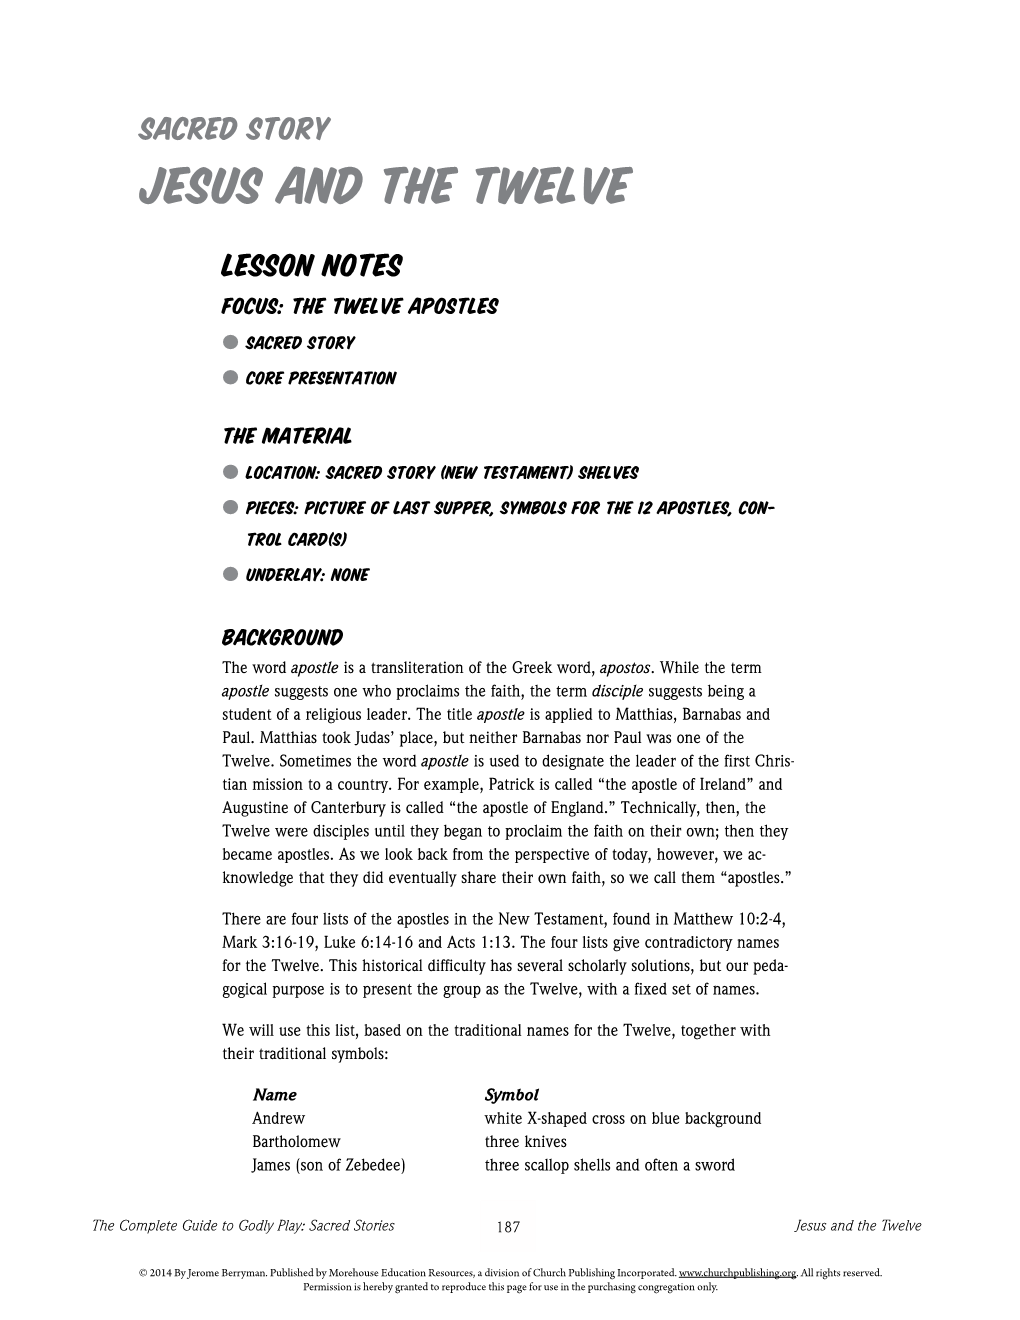 Jesus and the Twelve Lesson Notes Focus: the Twelve Apostles ● Sacred Story ● Core Presentation